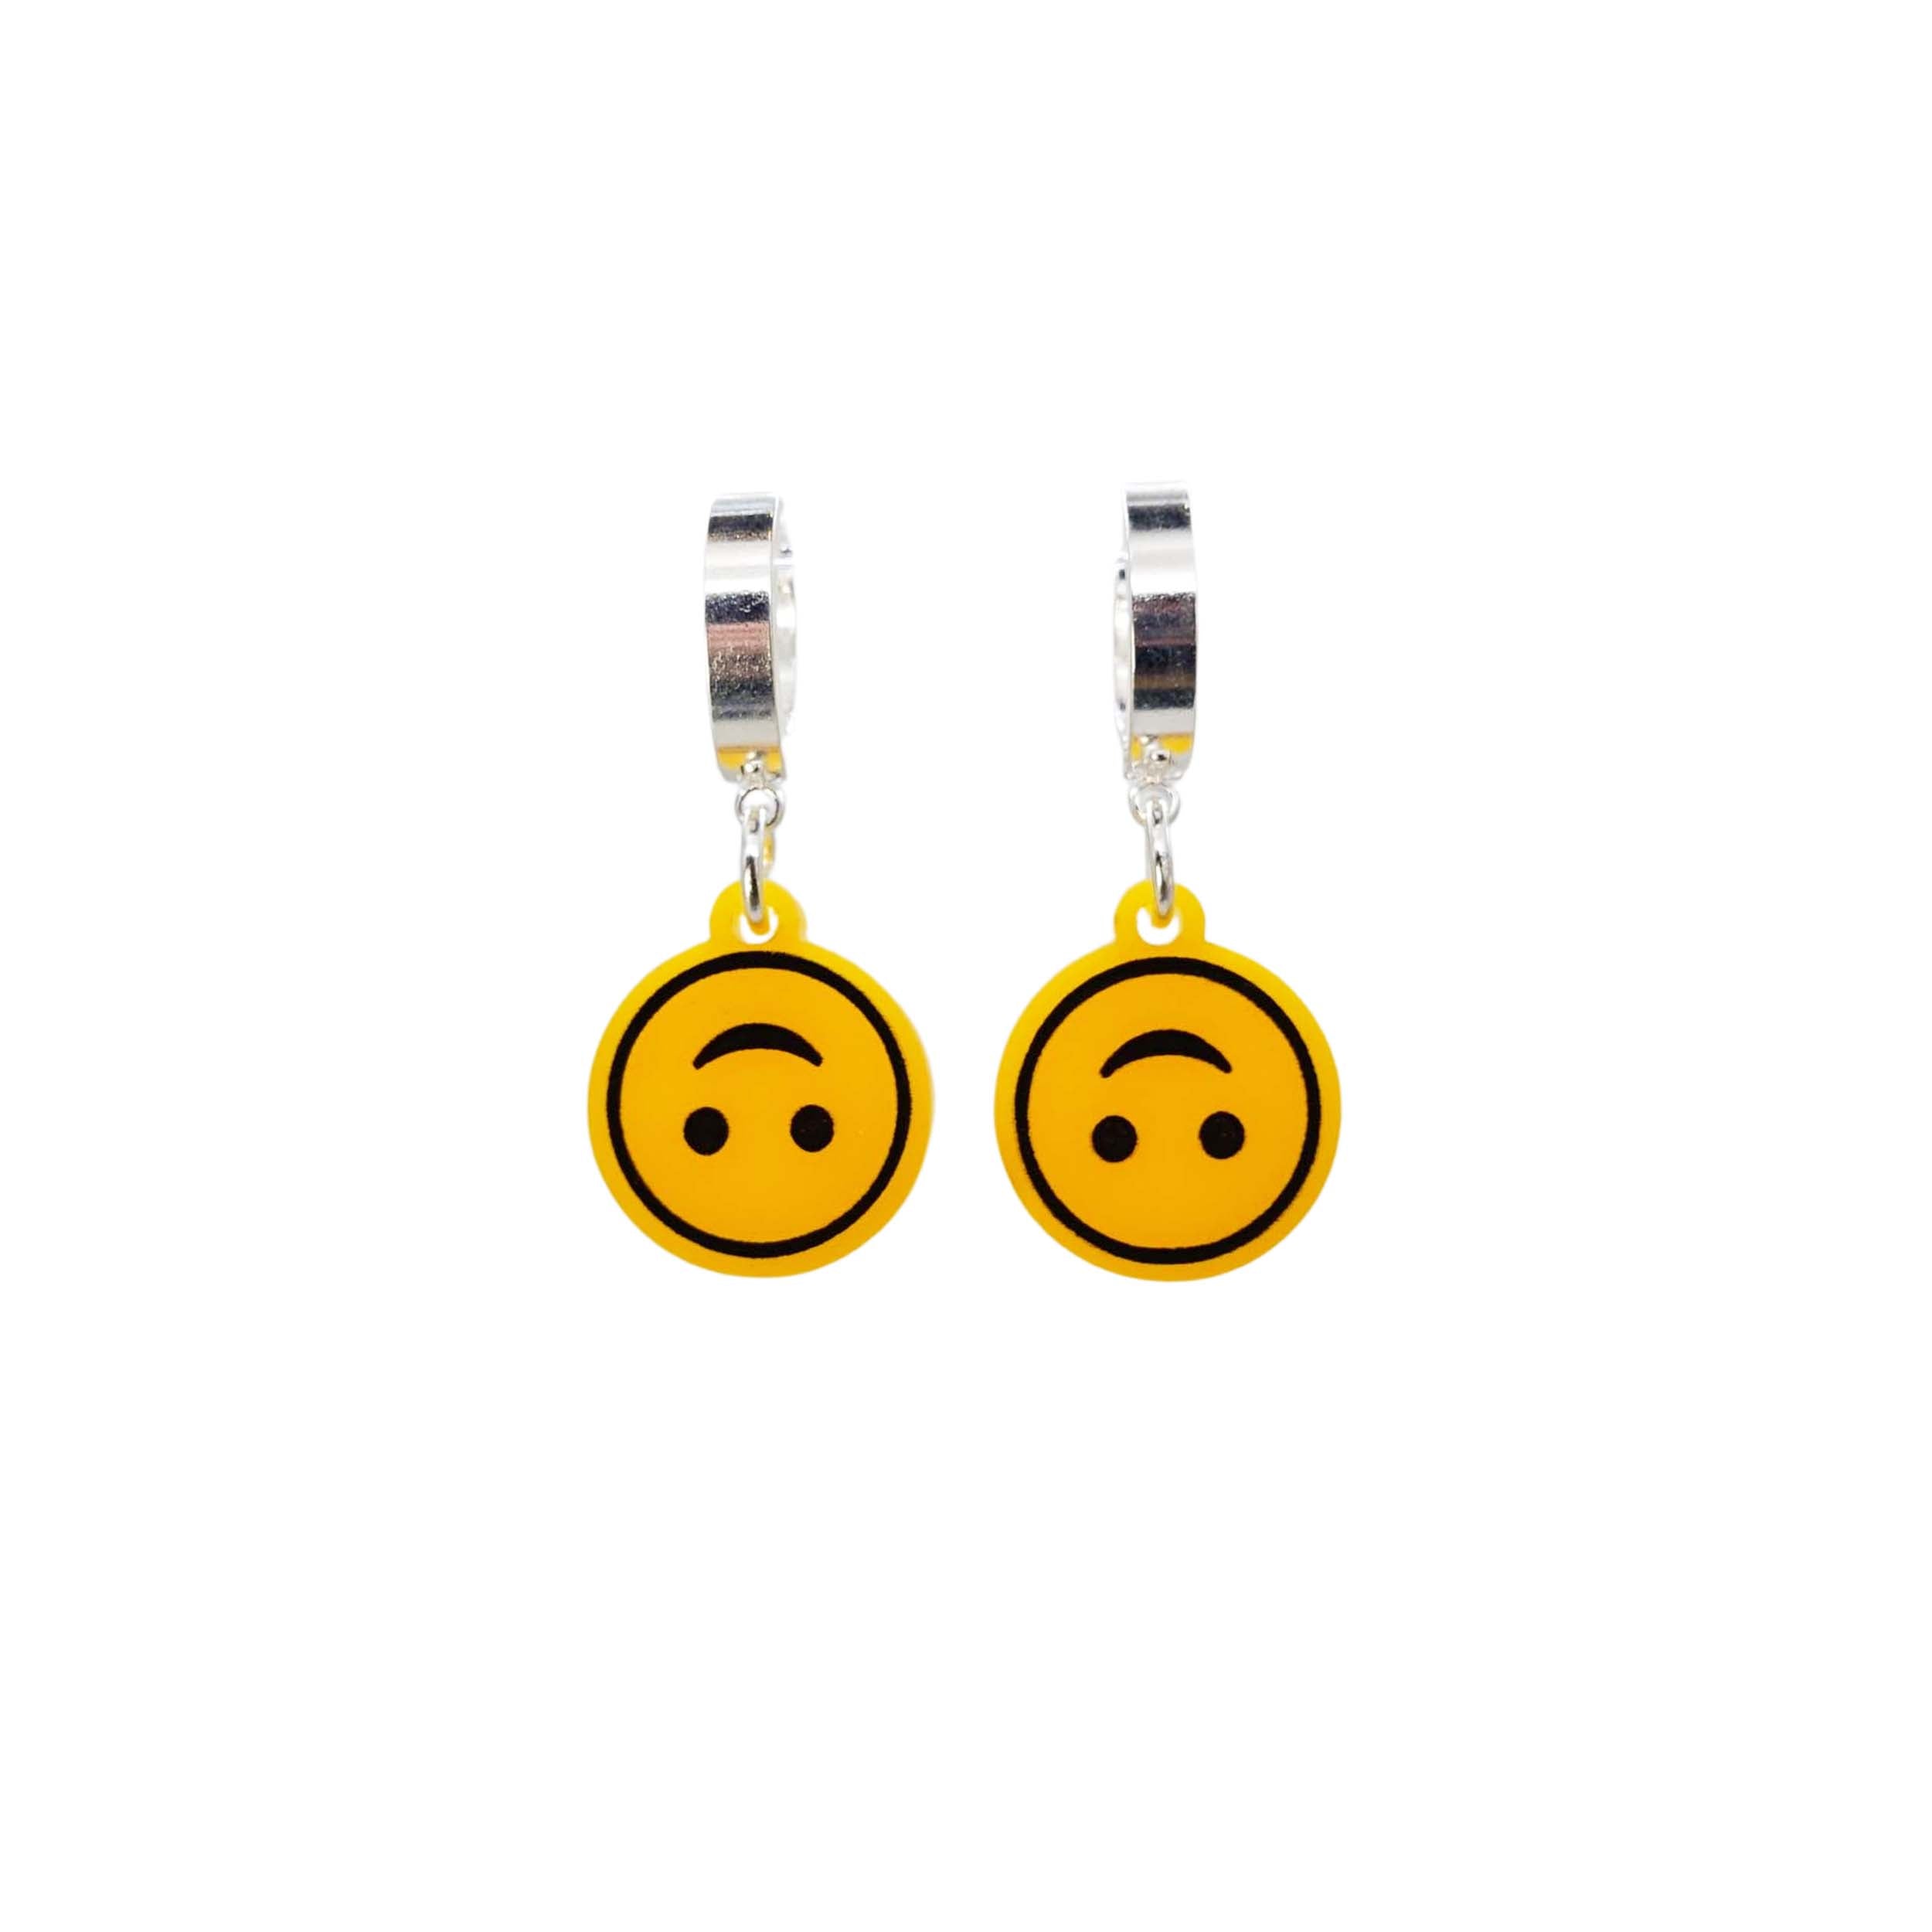 Upside-down smiley face emoji earrings on silver huggie hoops, shown hanging against a white background. 